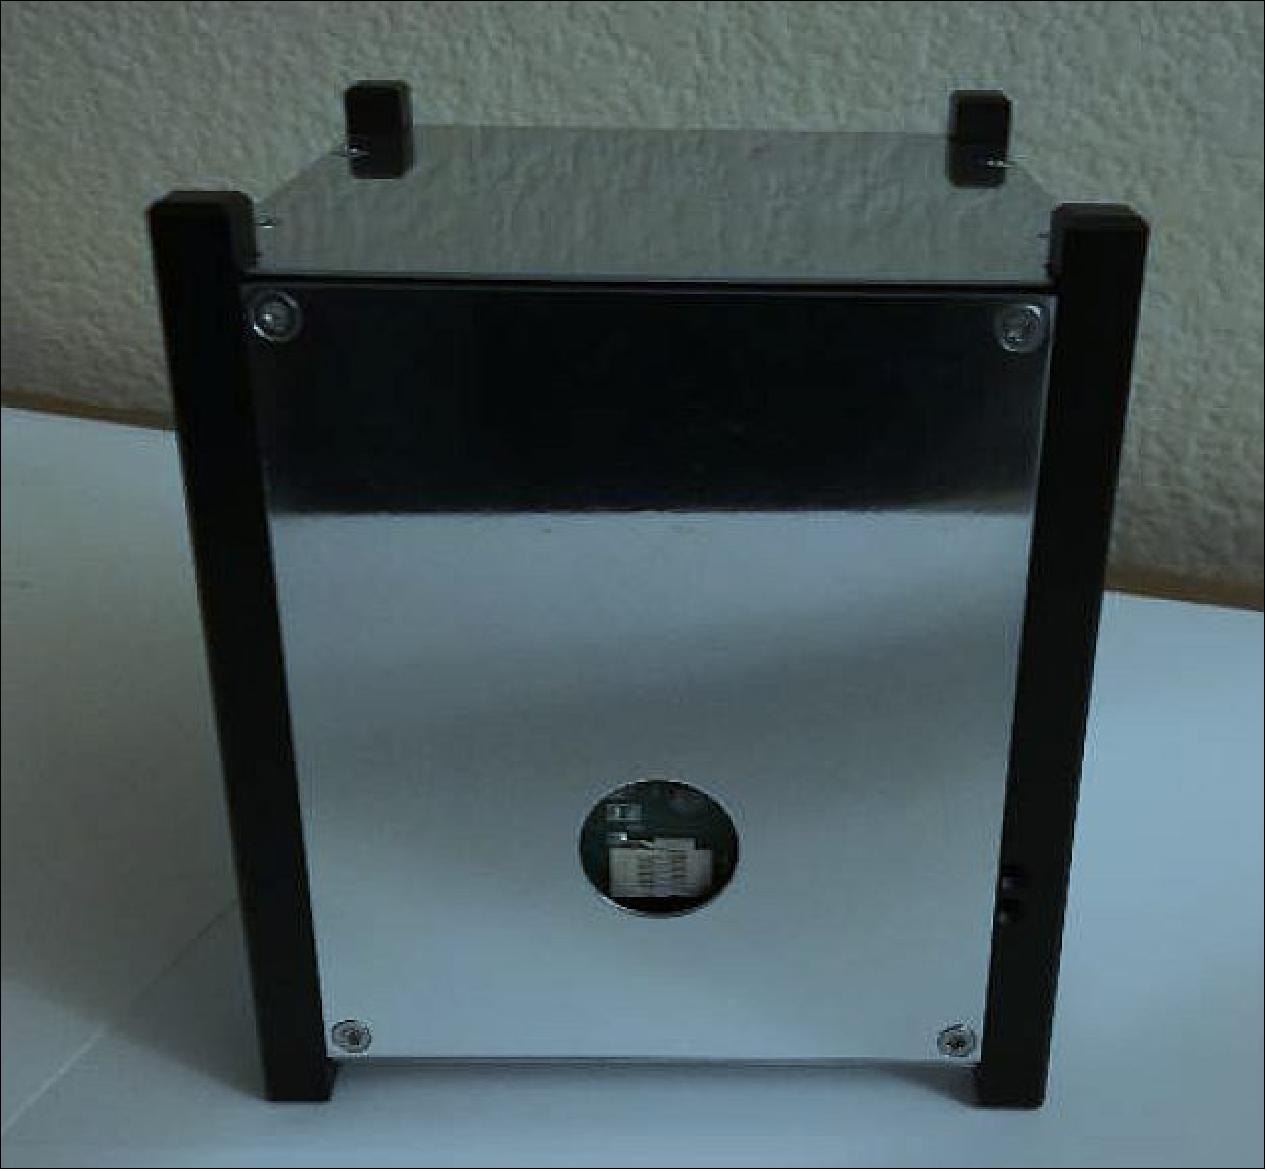 Figure 11: Elysium Star 2, a 1U CubeSat developed by Elysium Space, Inc., contains the ashes of individuals and serves as a memorial (Elysium Space, SRI)